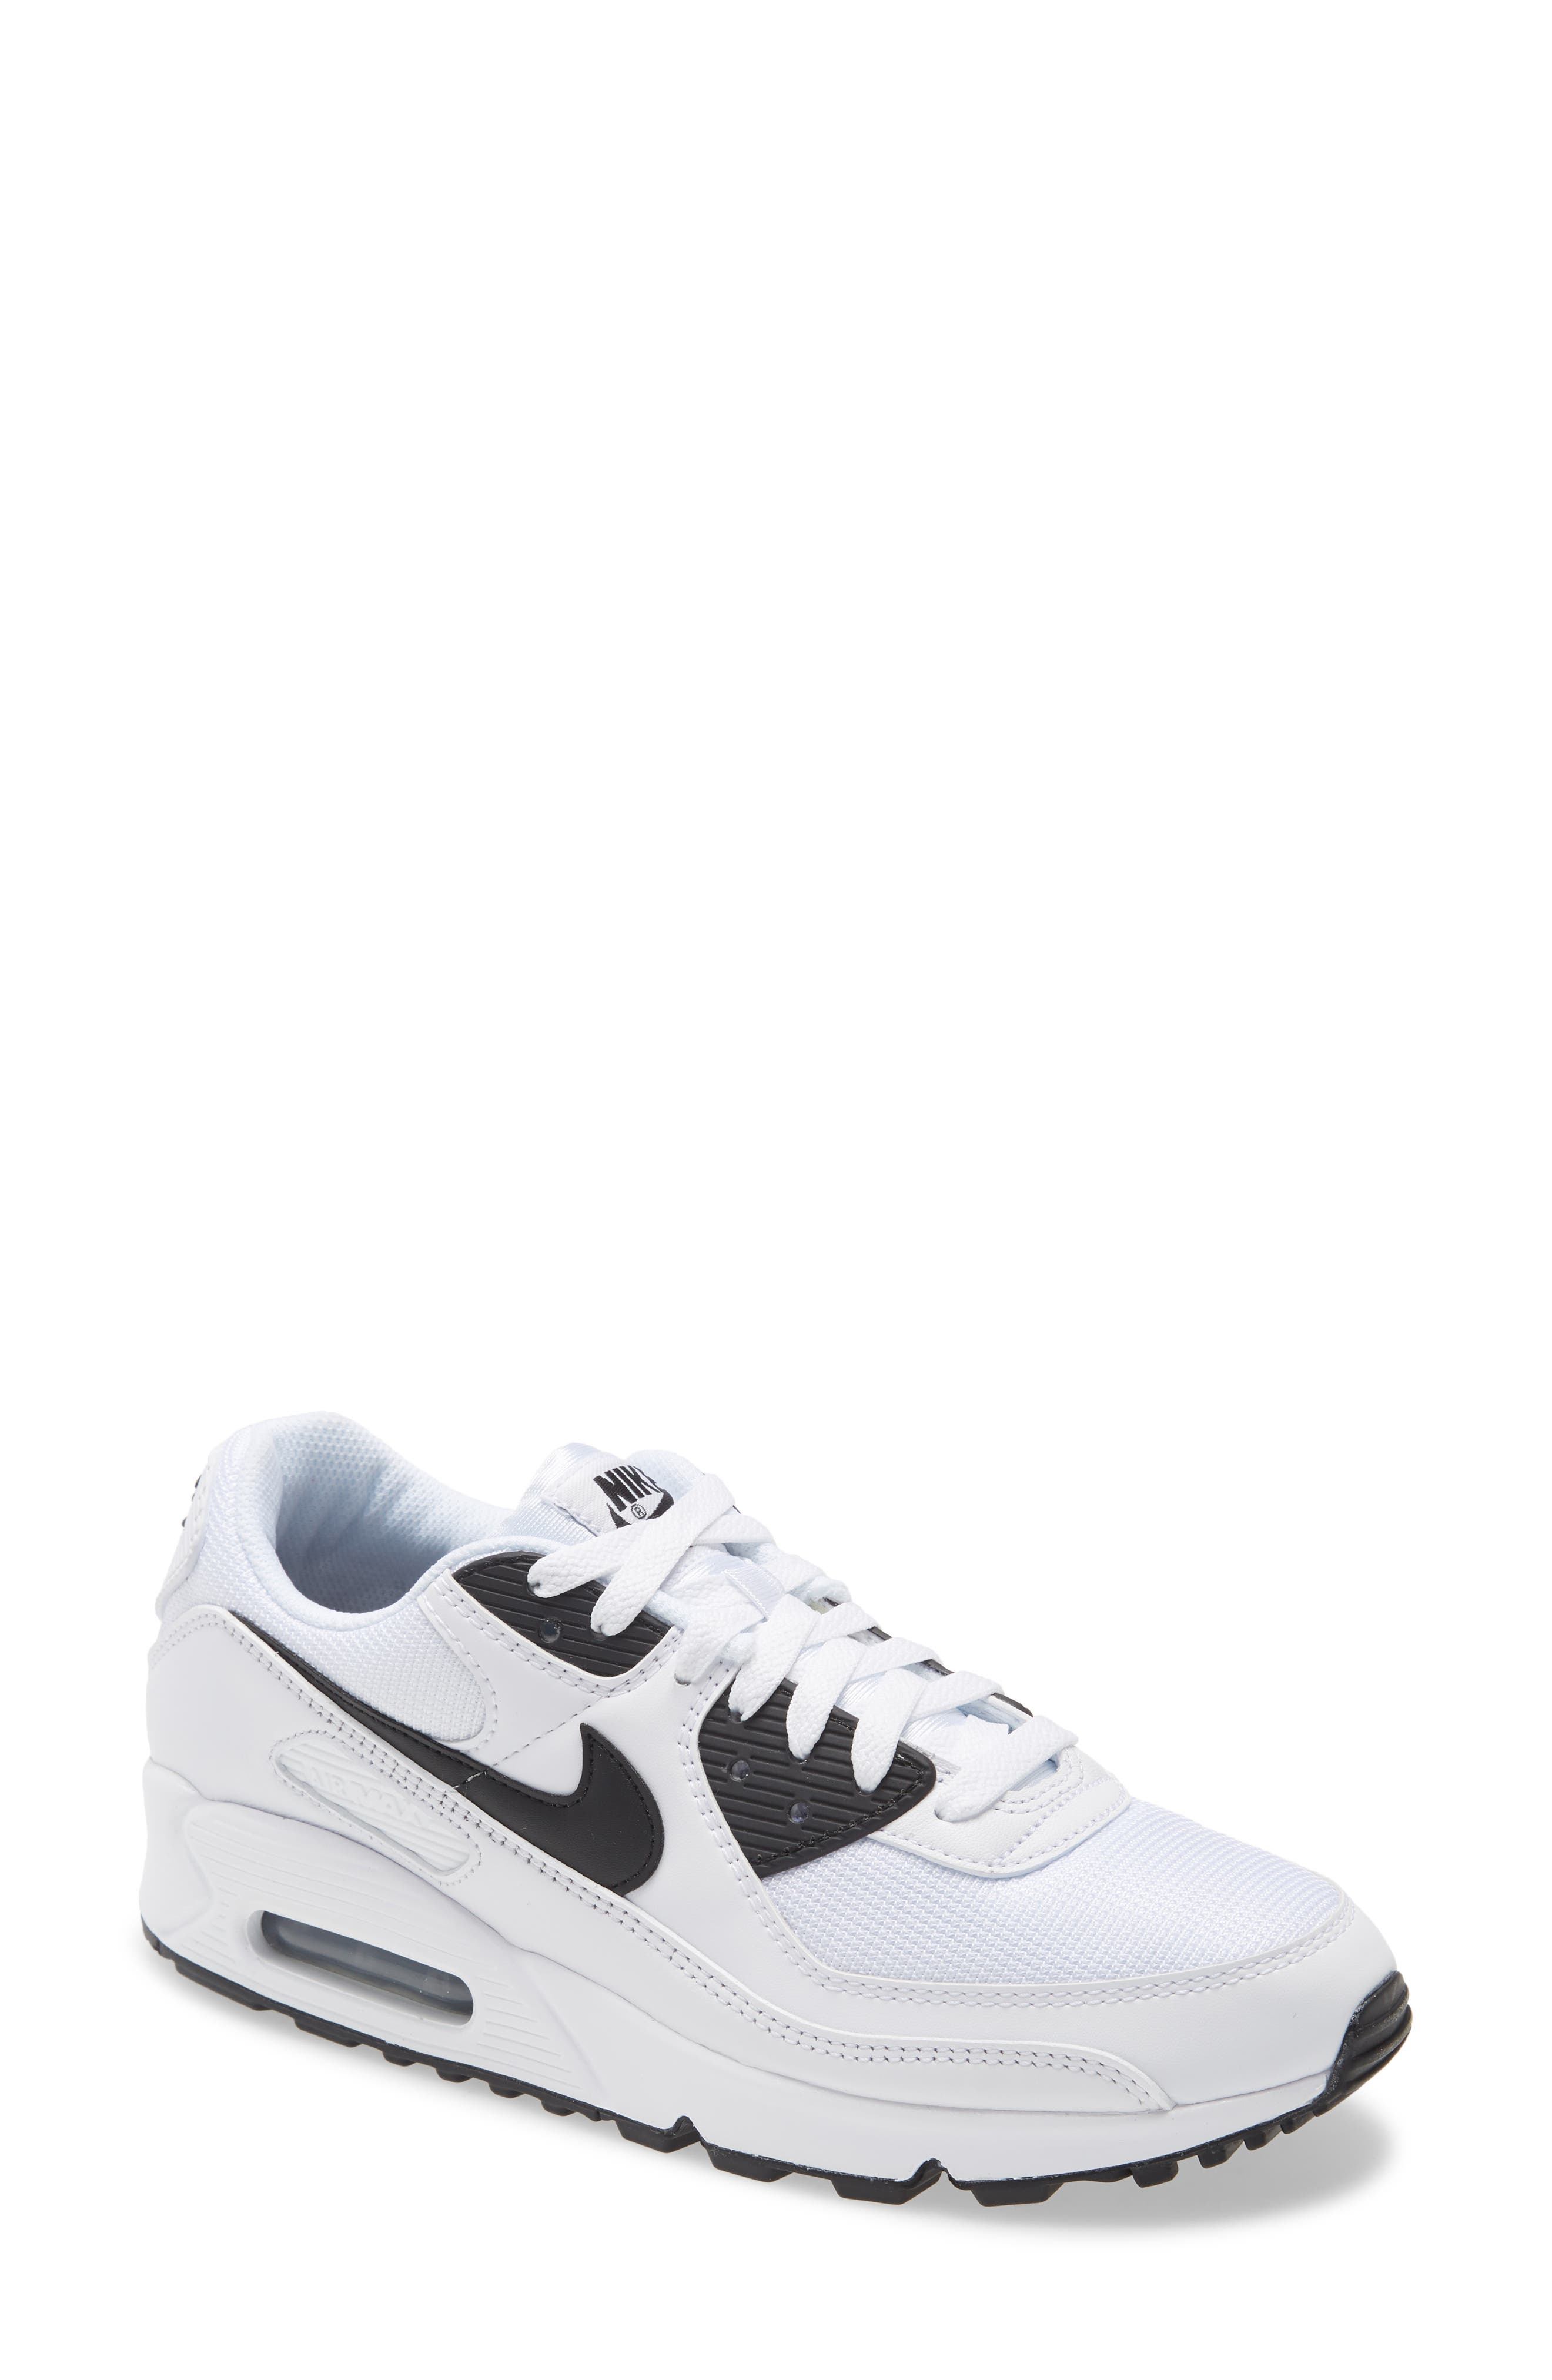 nike air max 9 good for running